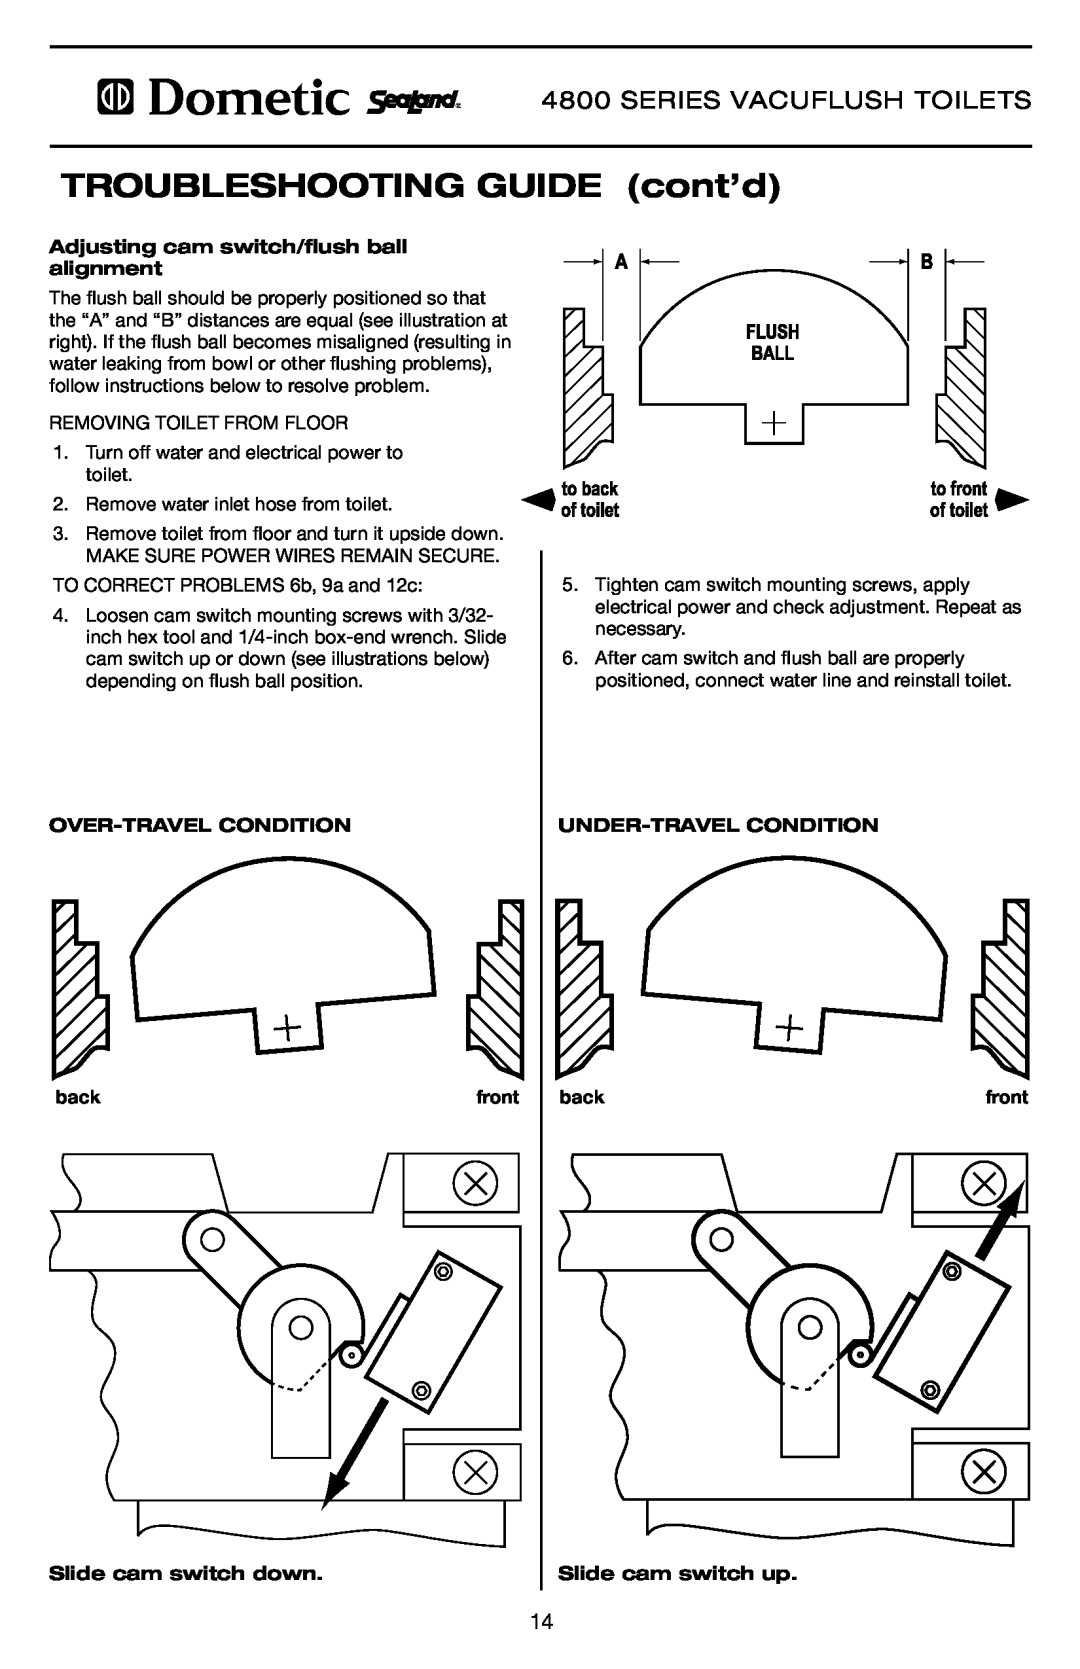 Dometic 4848 Troubleshooting Guide cont’d, Adjusting cam switch/flush ball alignment, Over-Travel Condition, back, front 